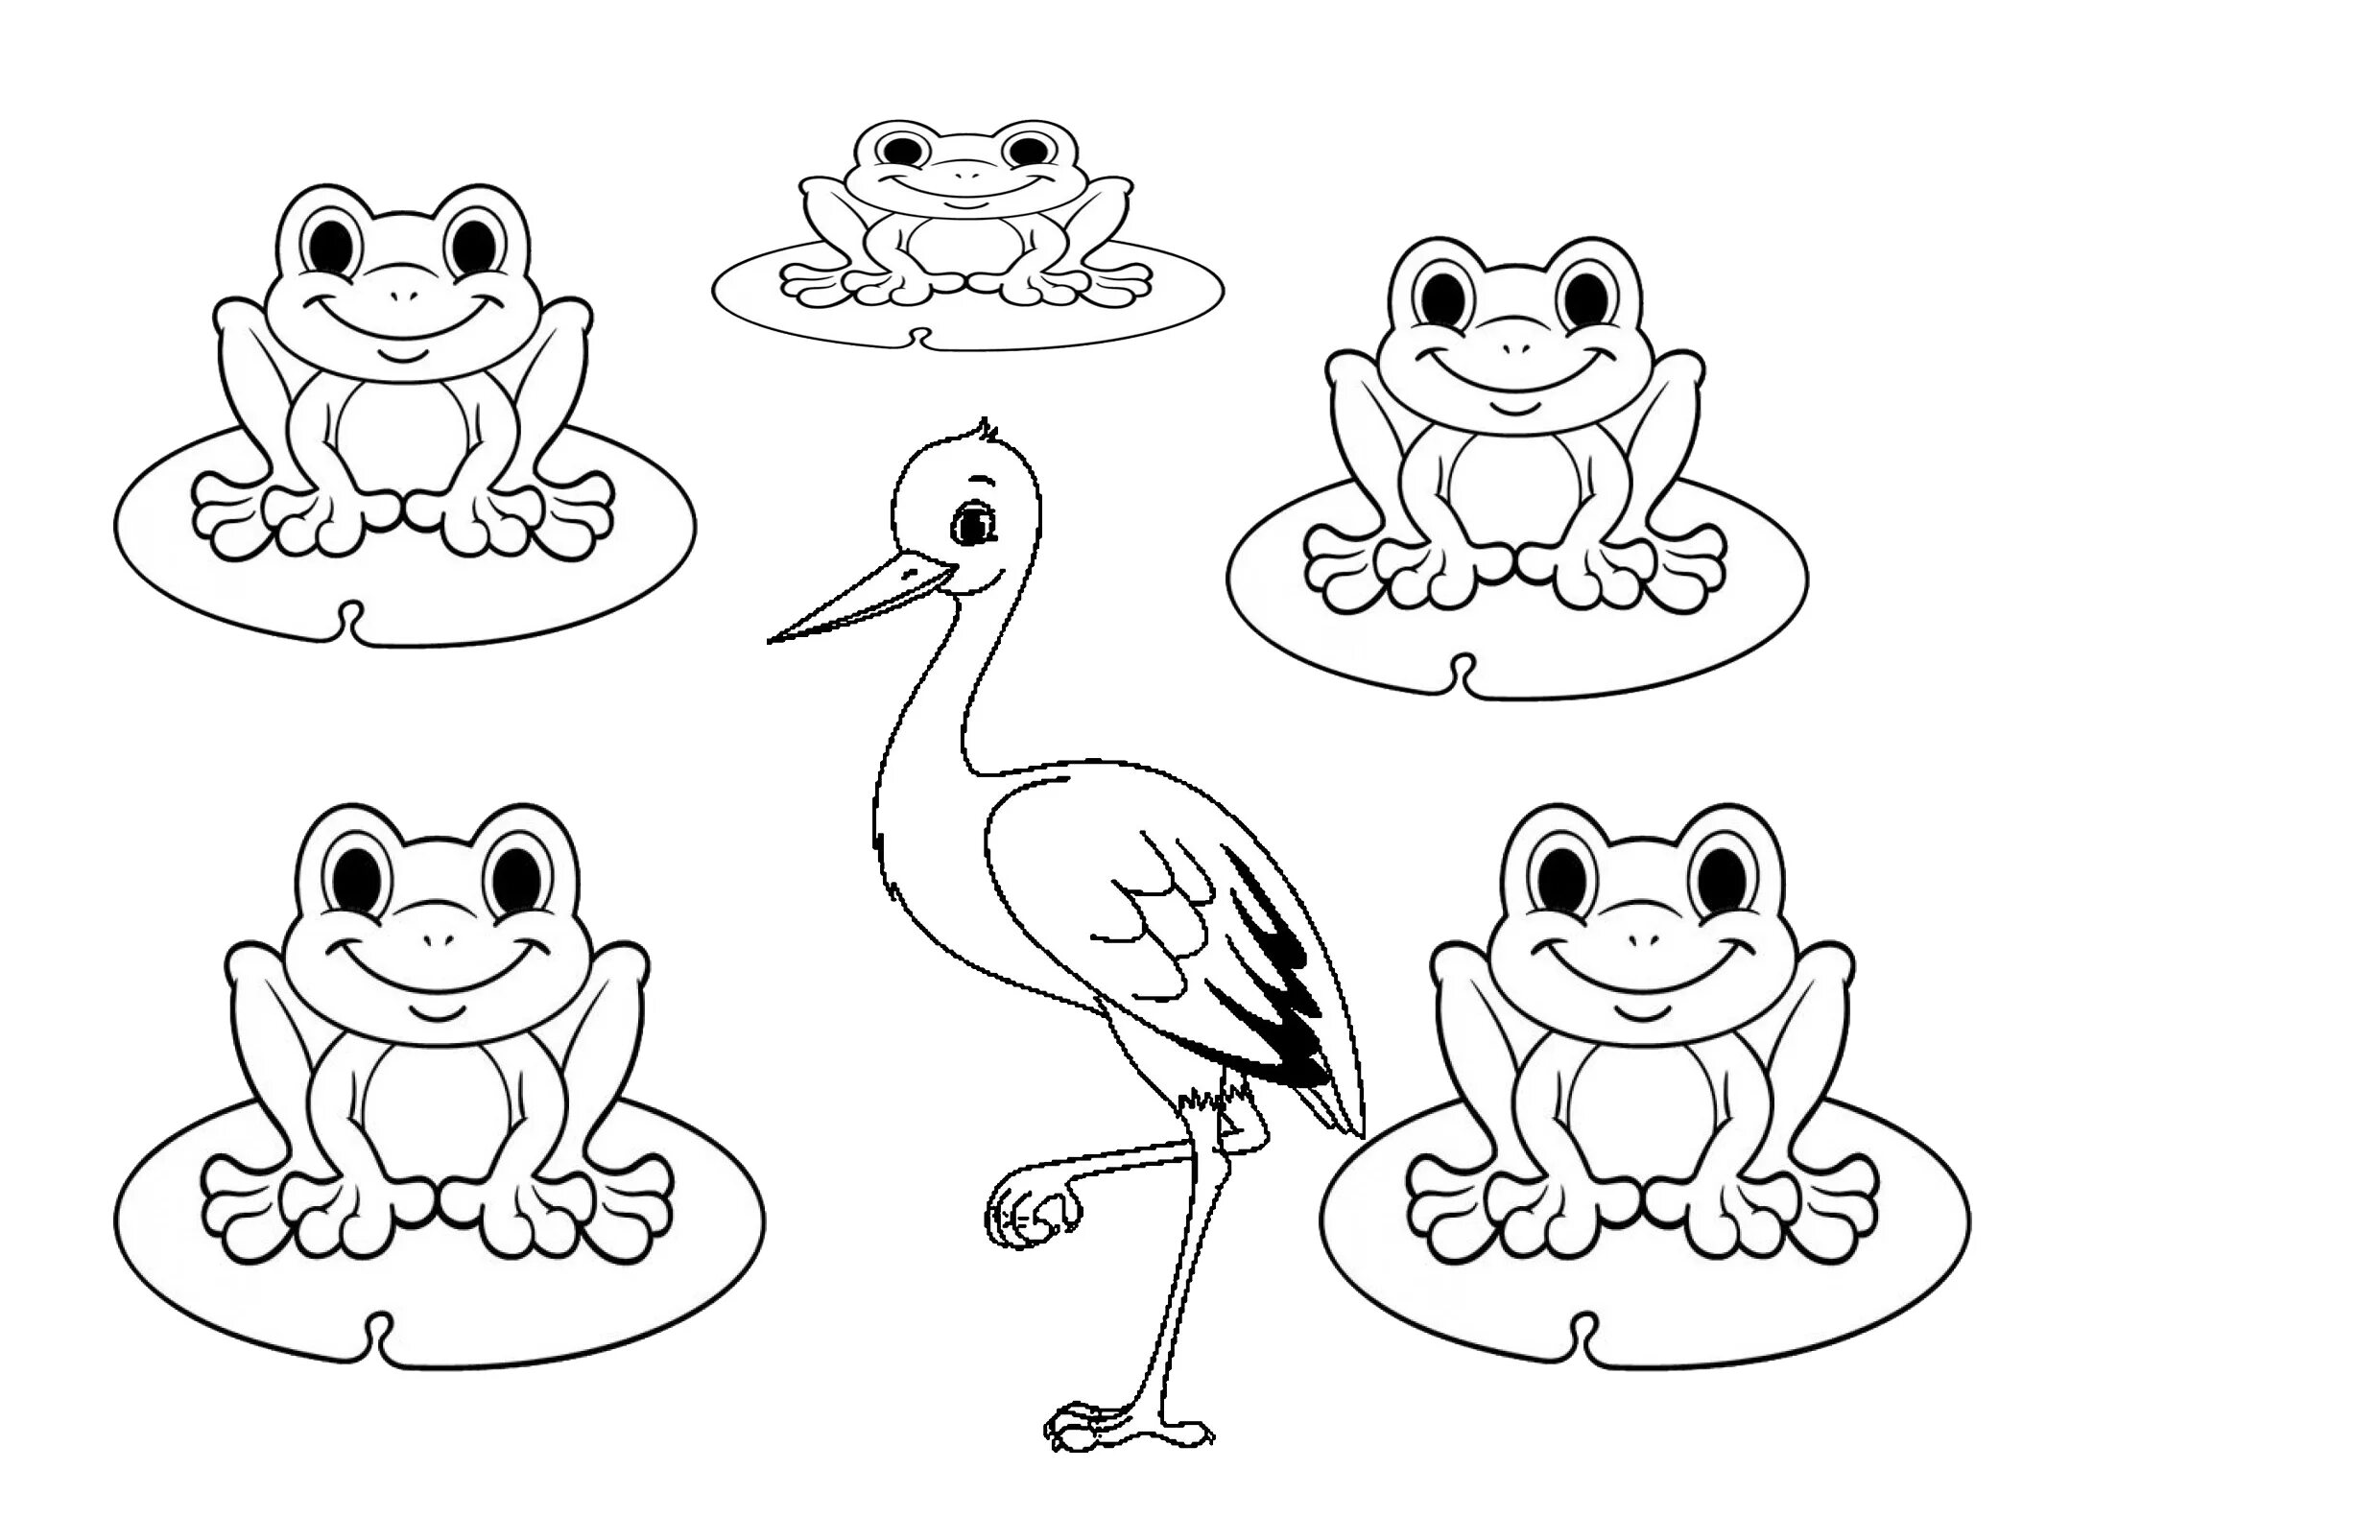 Stimulating frog coloring book for 4-5 year olds